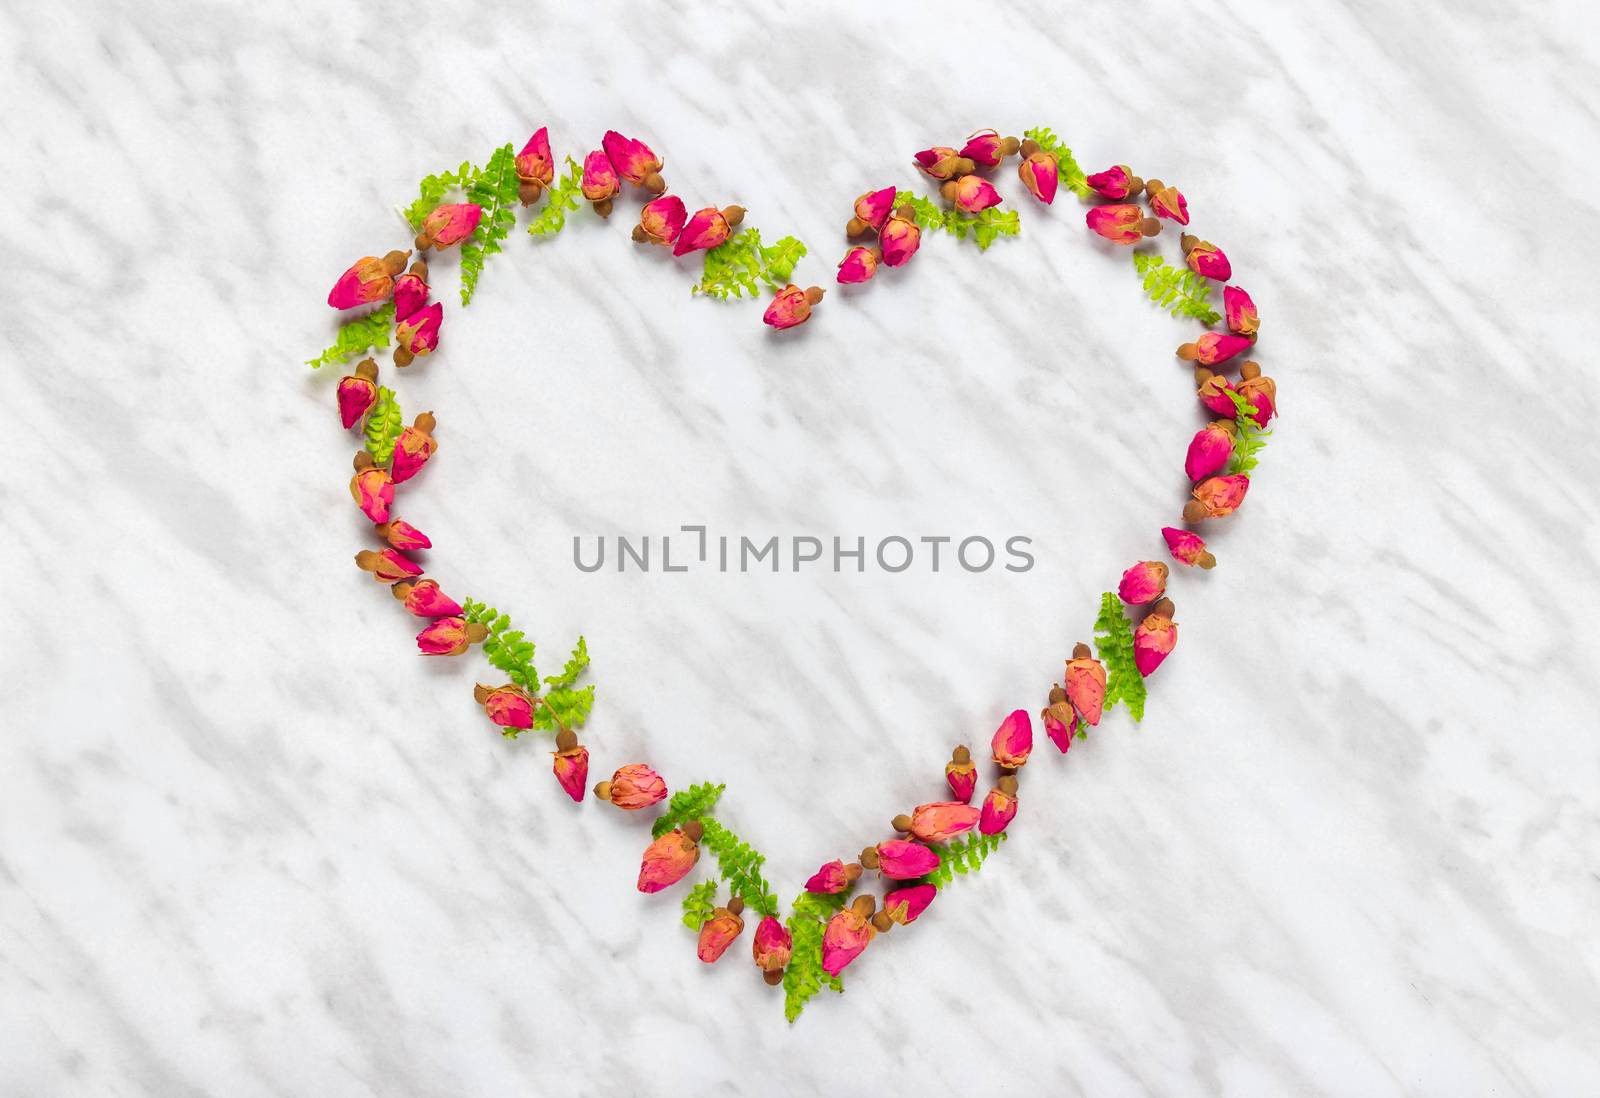 Heart made of rose buds and green leaves, on marble background.